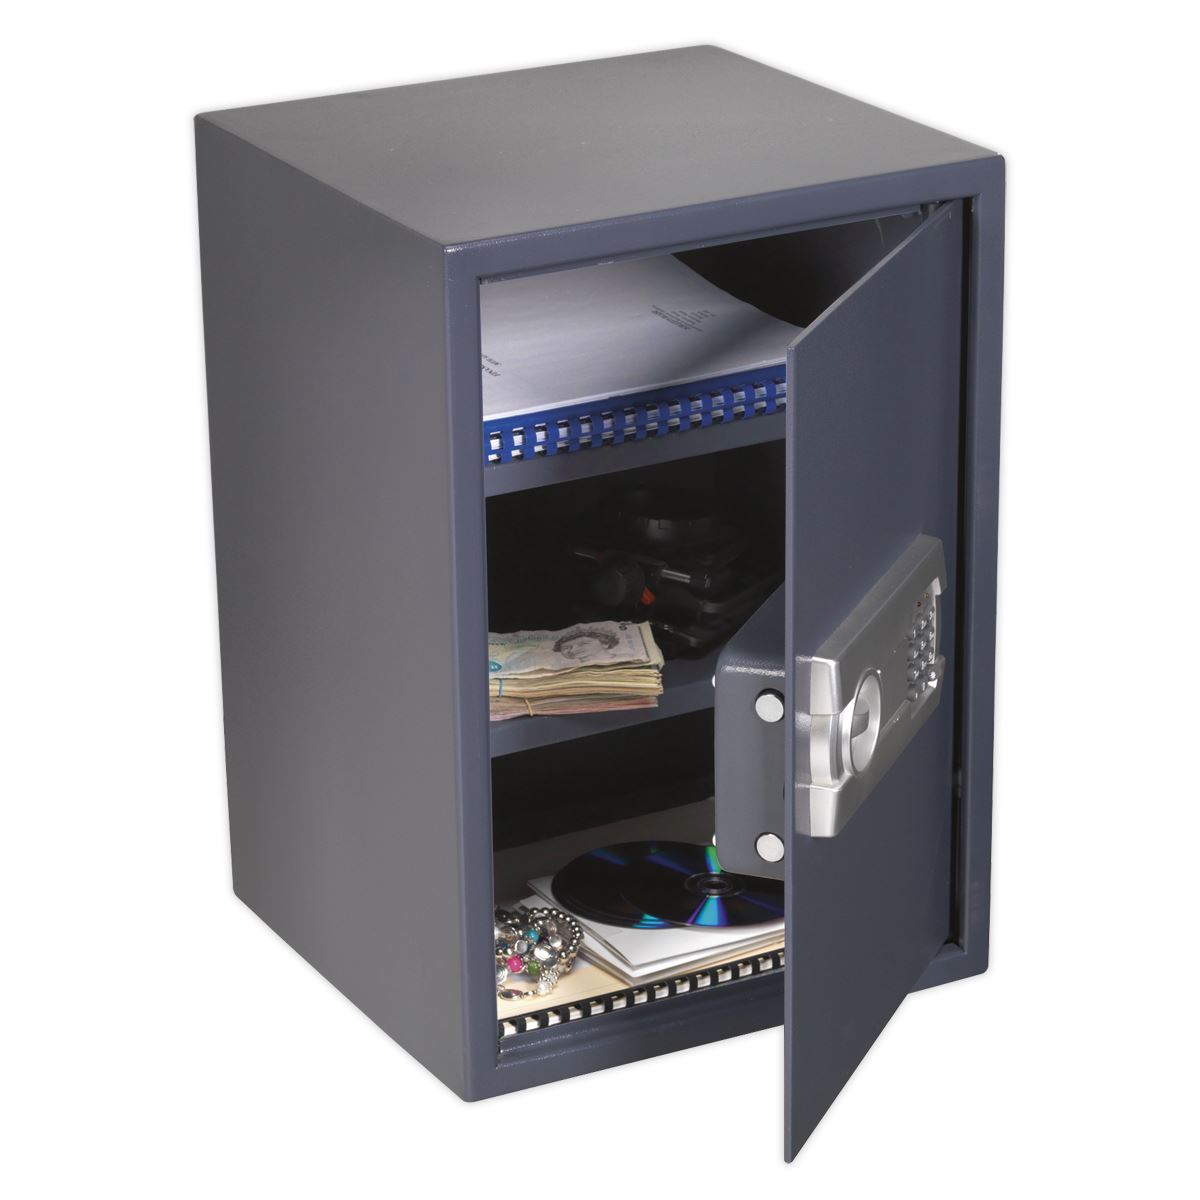 Sealey Electronic Combination Security Safe 350 x 330 x 500mm SECS04